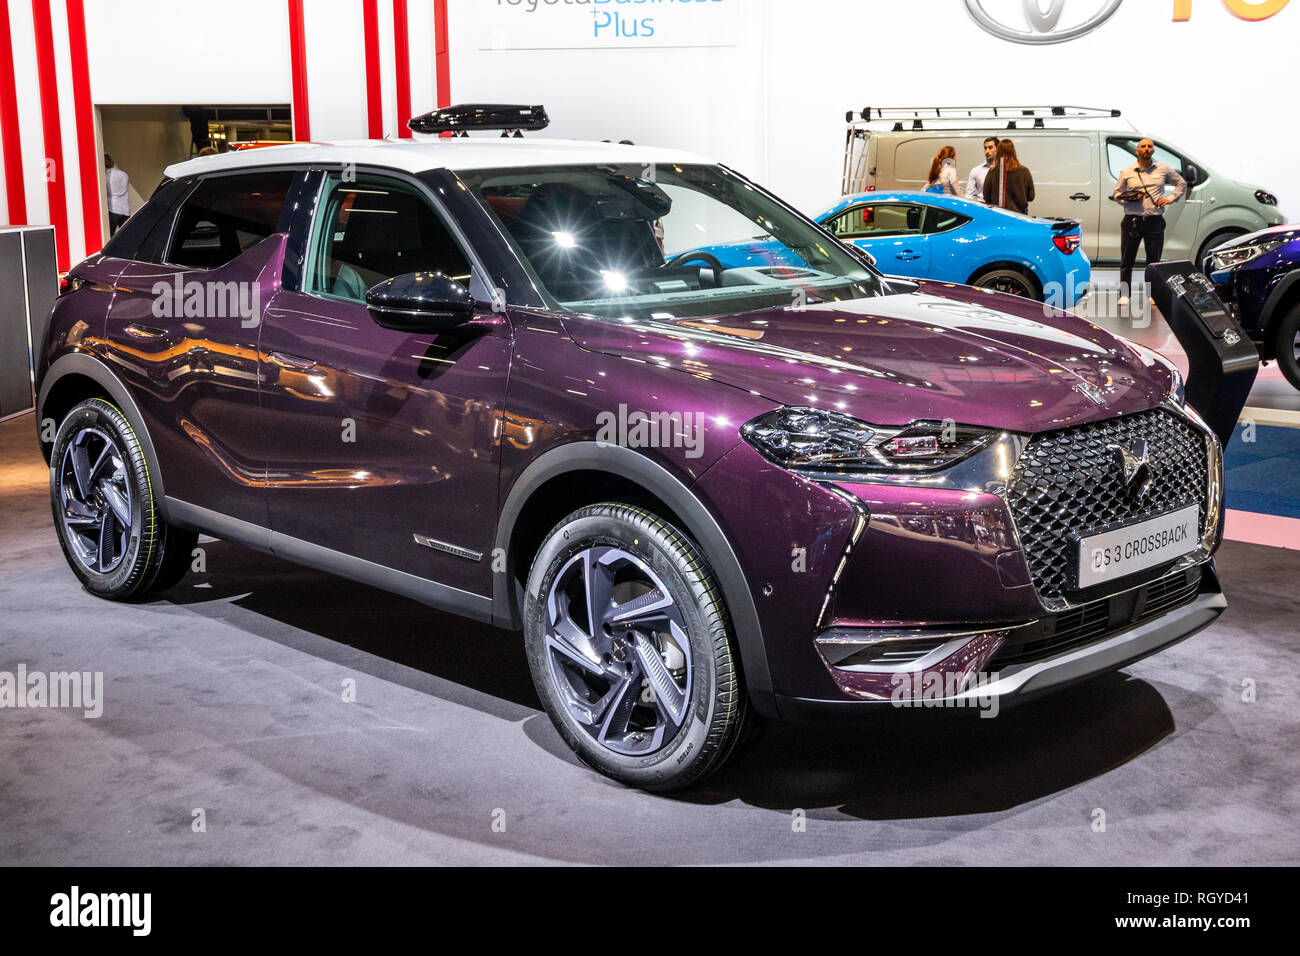 BRUSSELS - JAN 18, 2019: Citroen DS 3 Crossback E-Tense car showcased at the 97th Brussels Motor Show 2019 Autosalon. Stock Photo